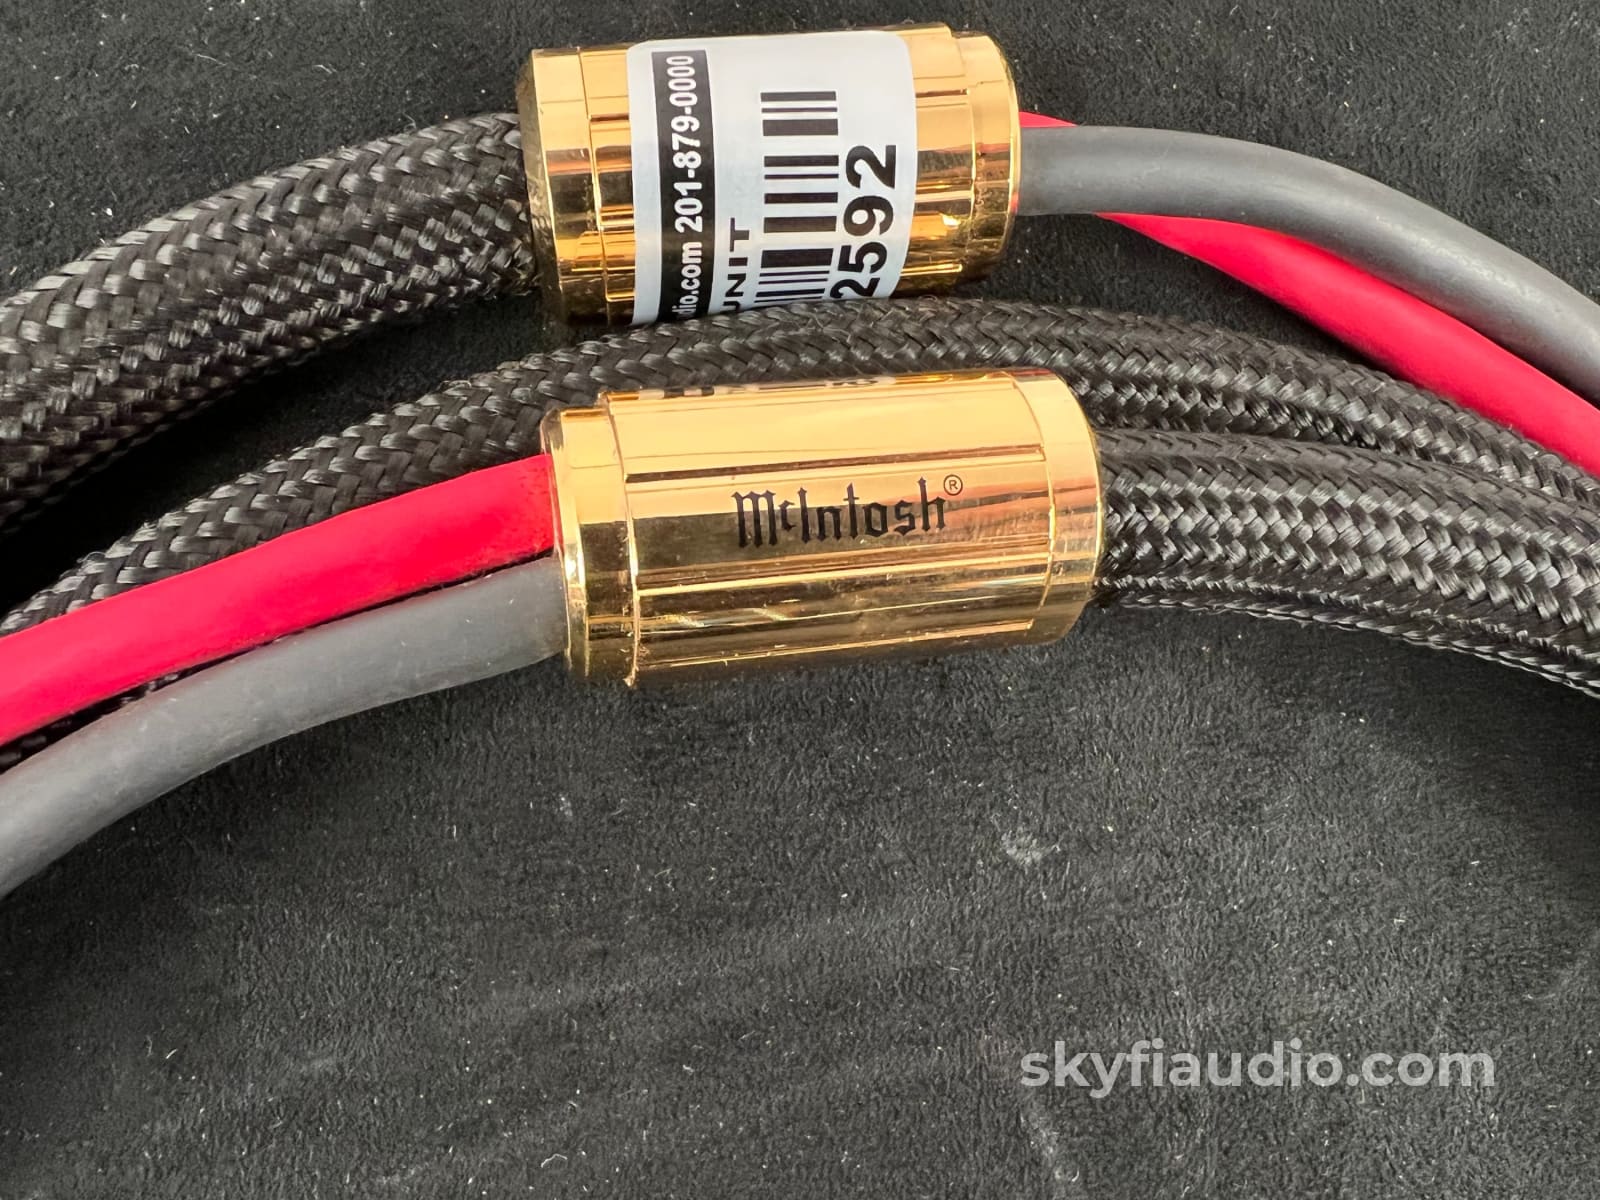 Mcintosh Speaker Cable (Single) W/Spades - 2M In Store Only Cables